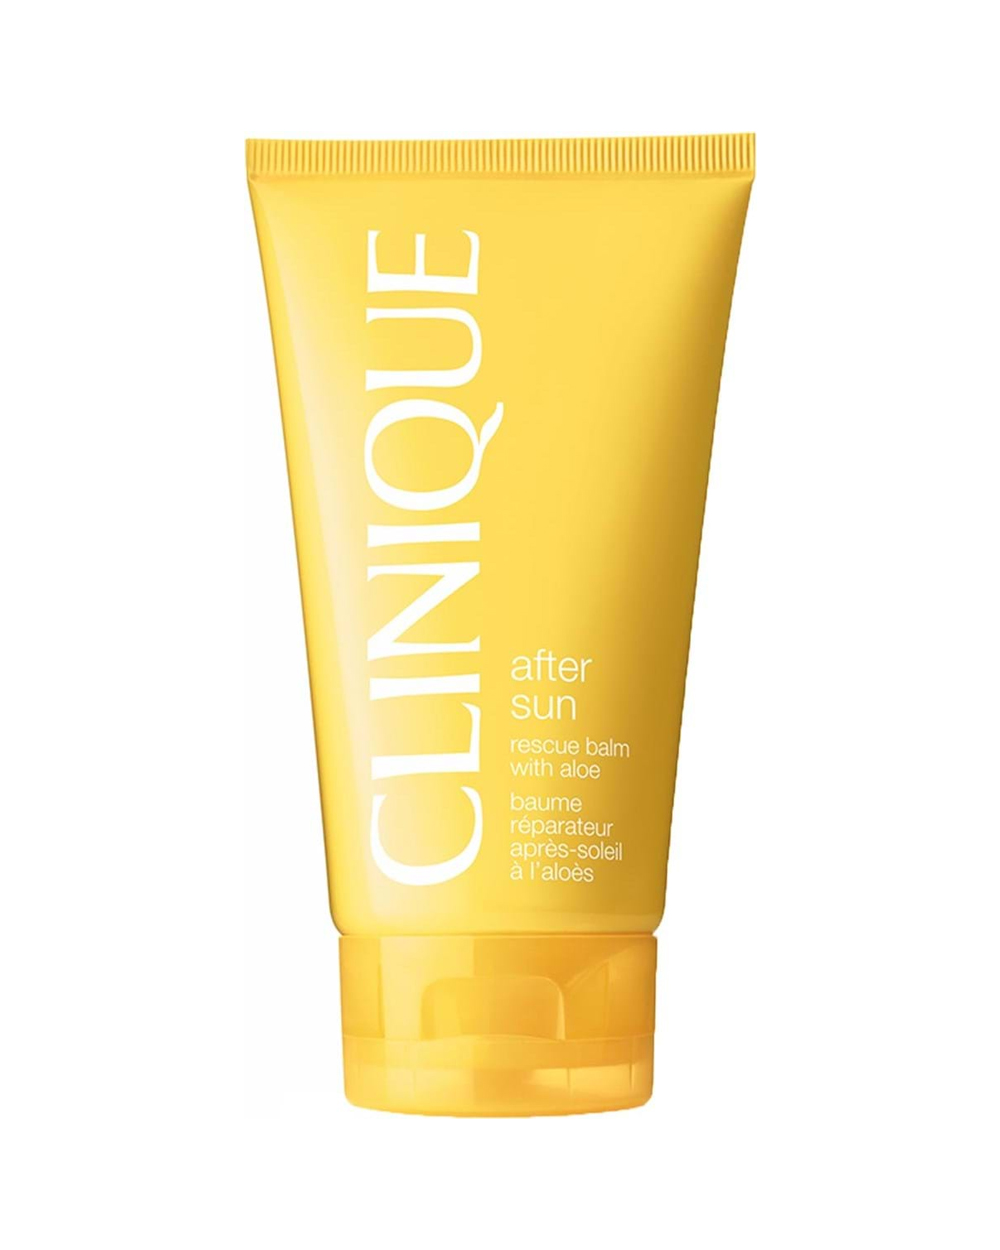 Clinique After Sun Rescue with Aloe, $47 from Farmers